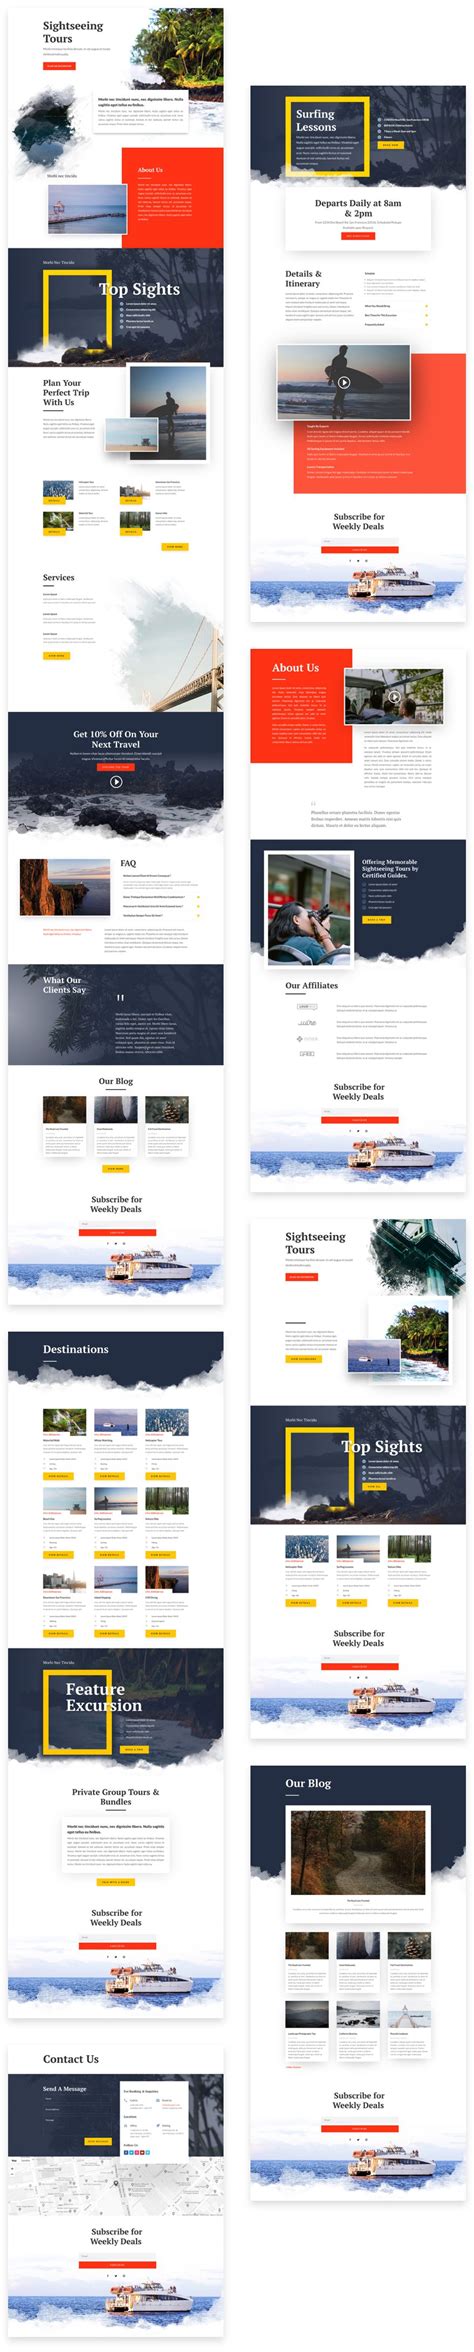 Get A Free Sightseeing Layout Pack For Divi